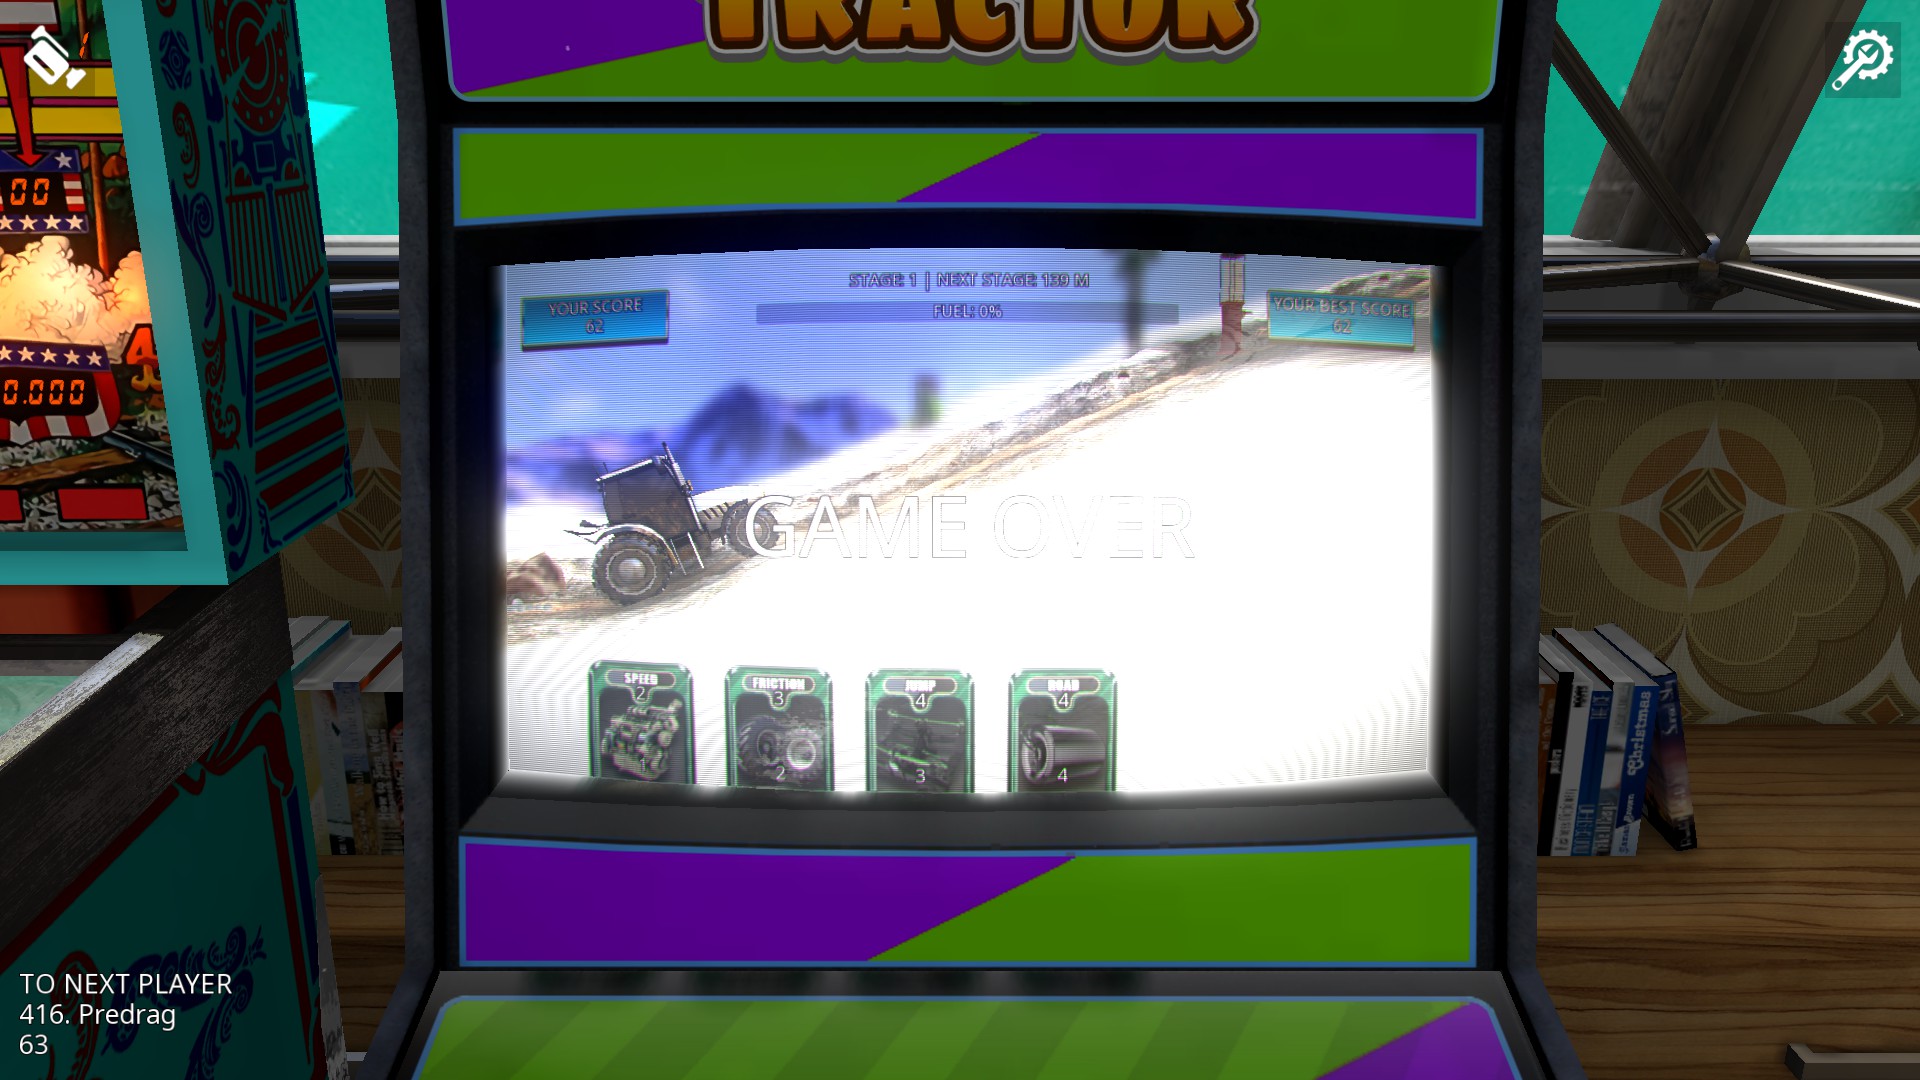 e2e4: Zaccaria Pinball: Up Hill Tractor (PC) 62 points on 2022-05-13 01:57:49